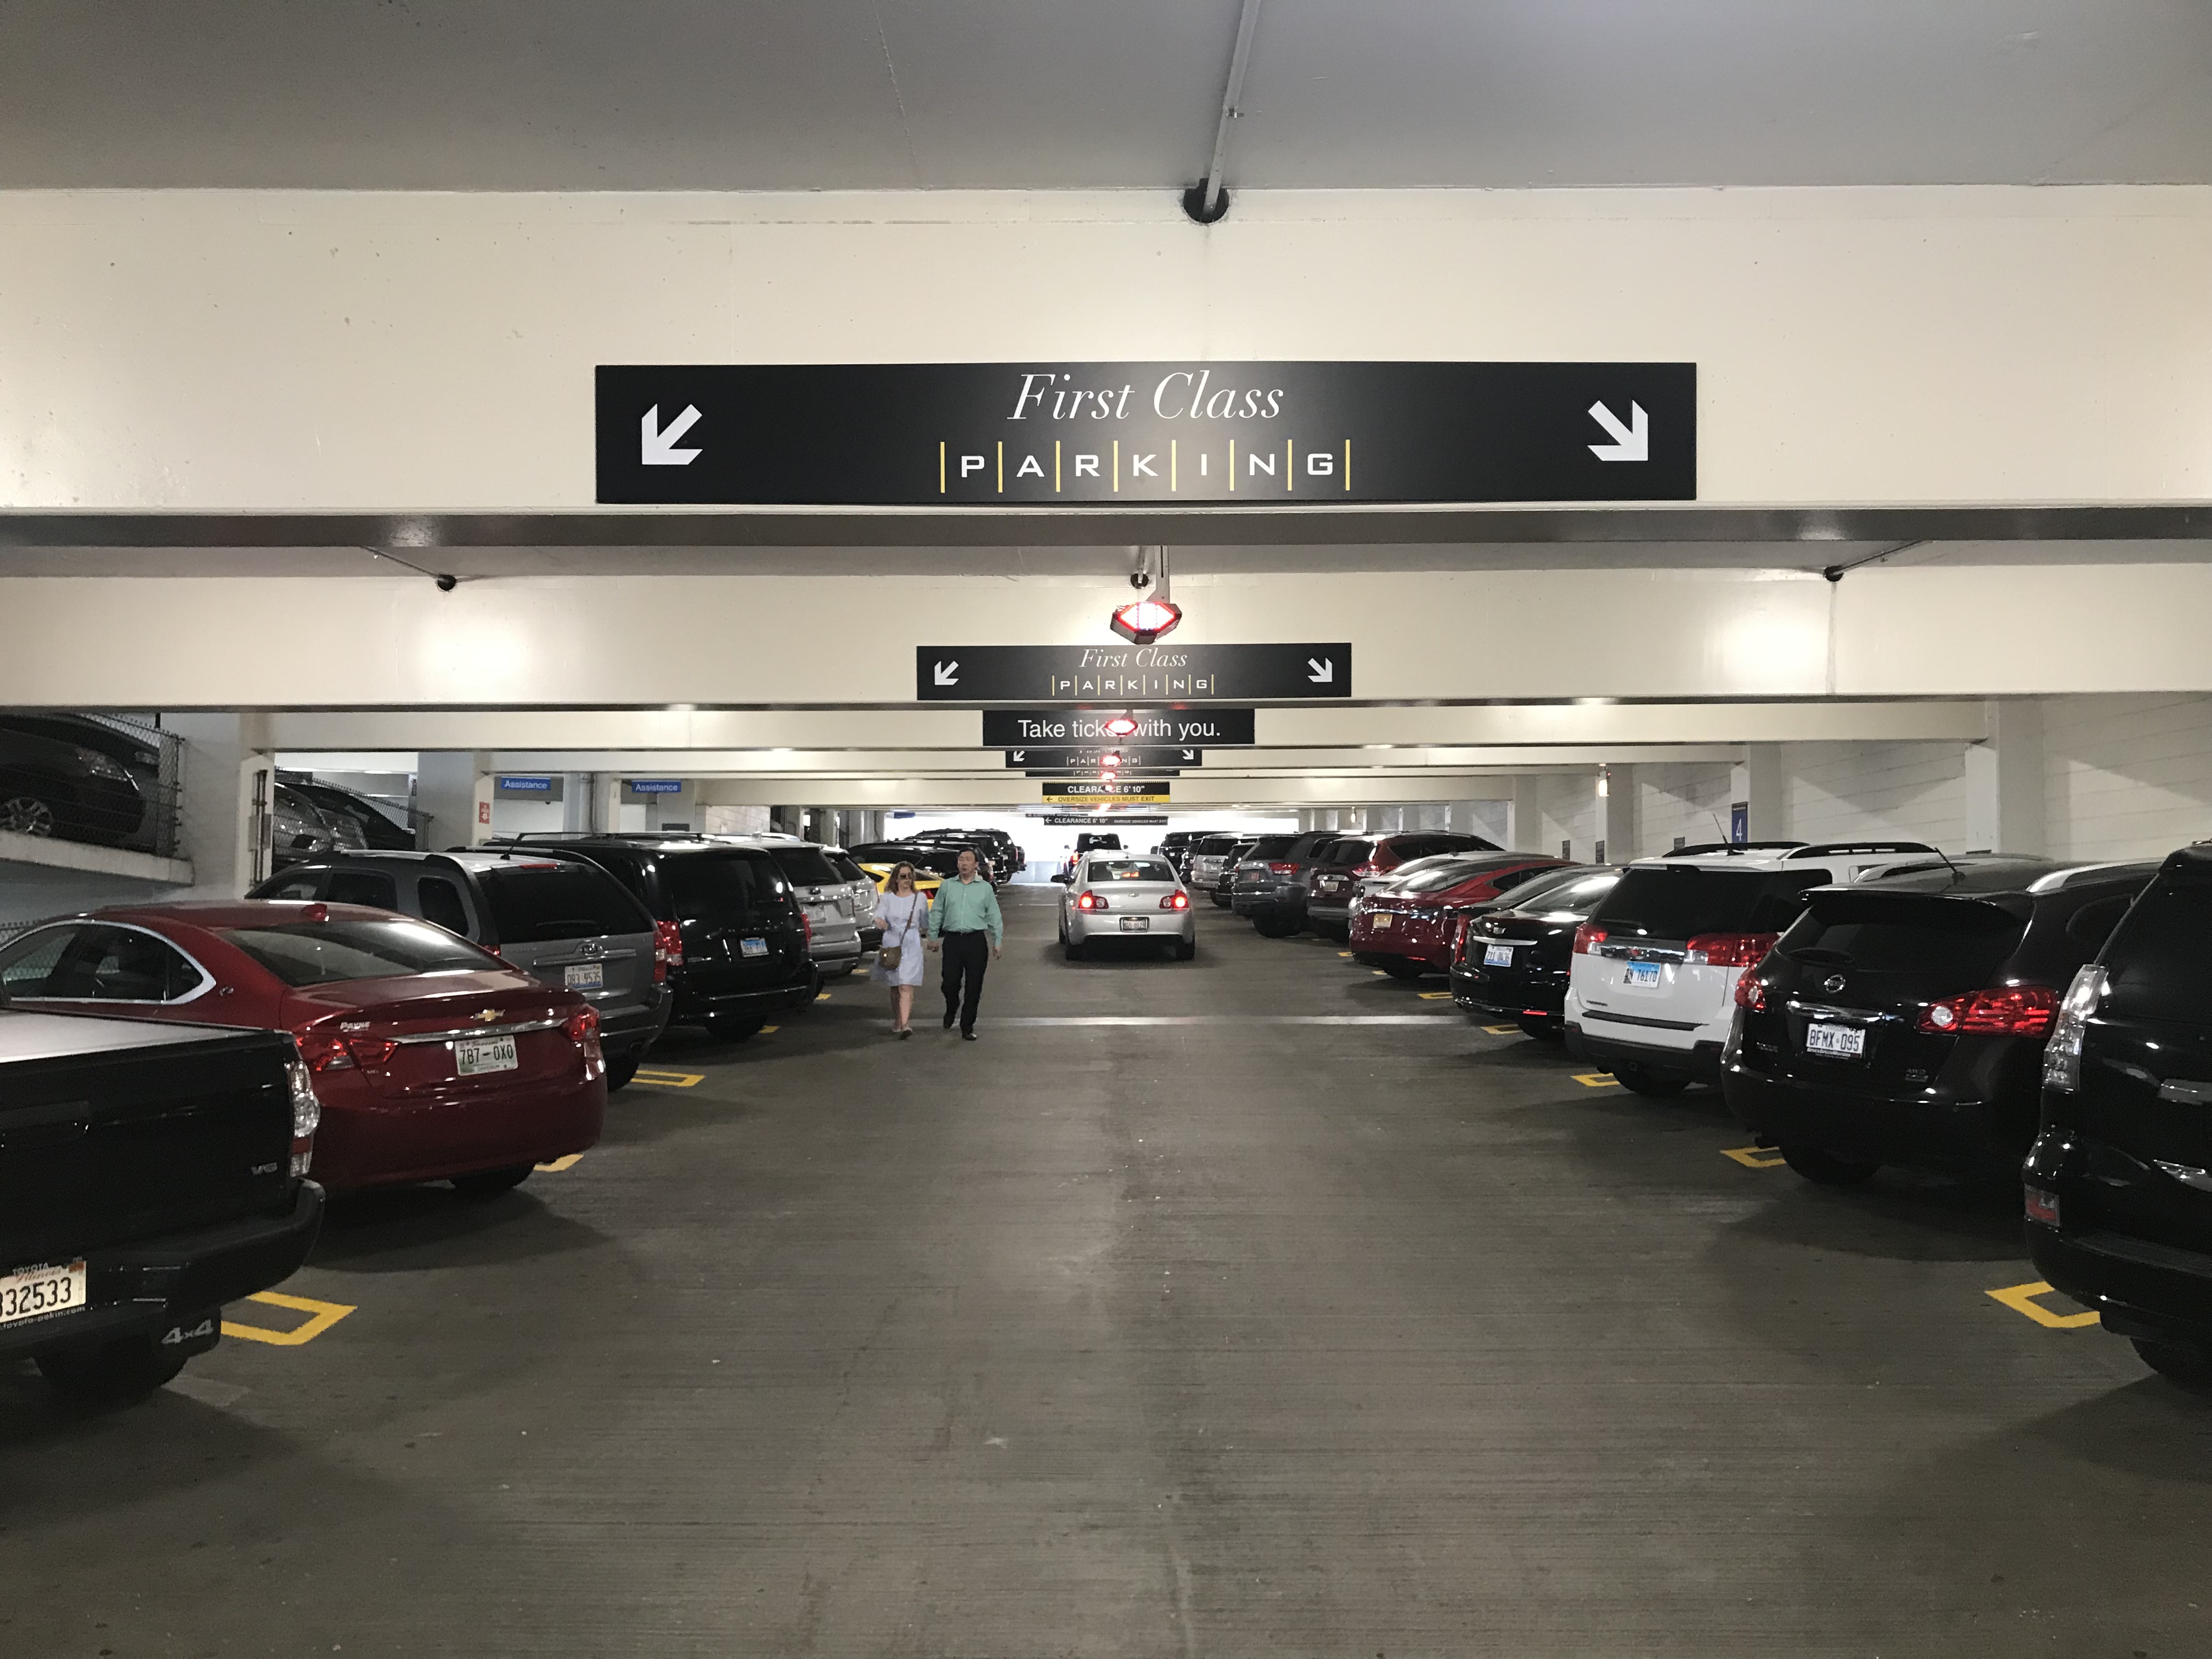 The new First Class parking area is close to the entrance and elevators.